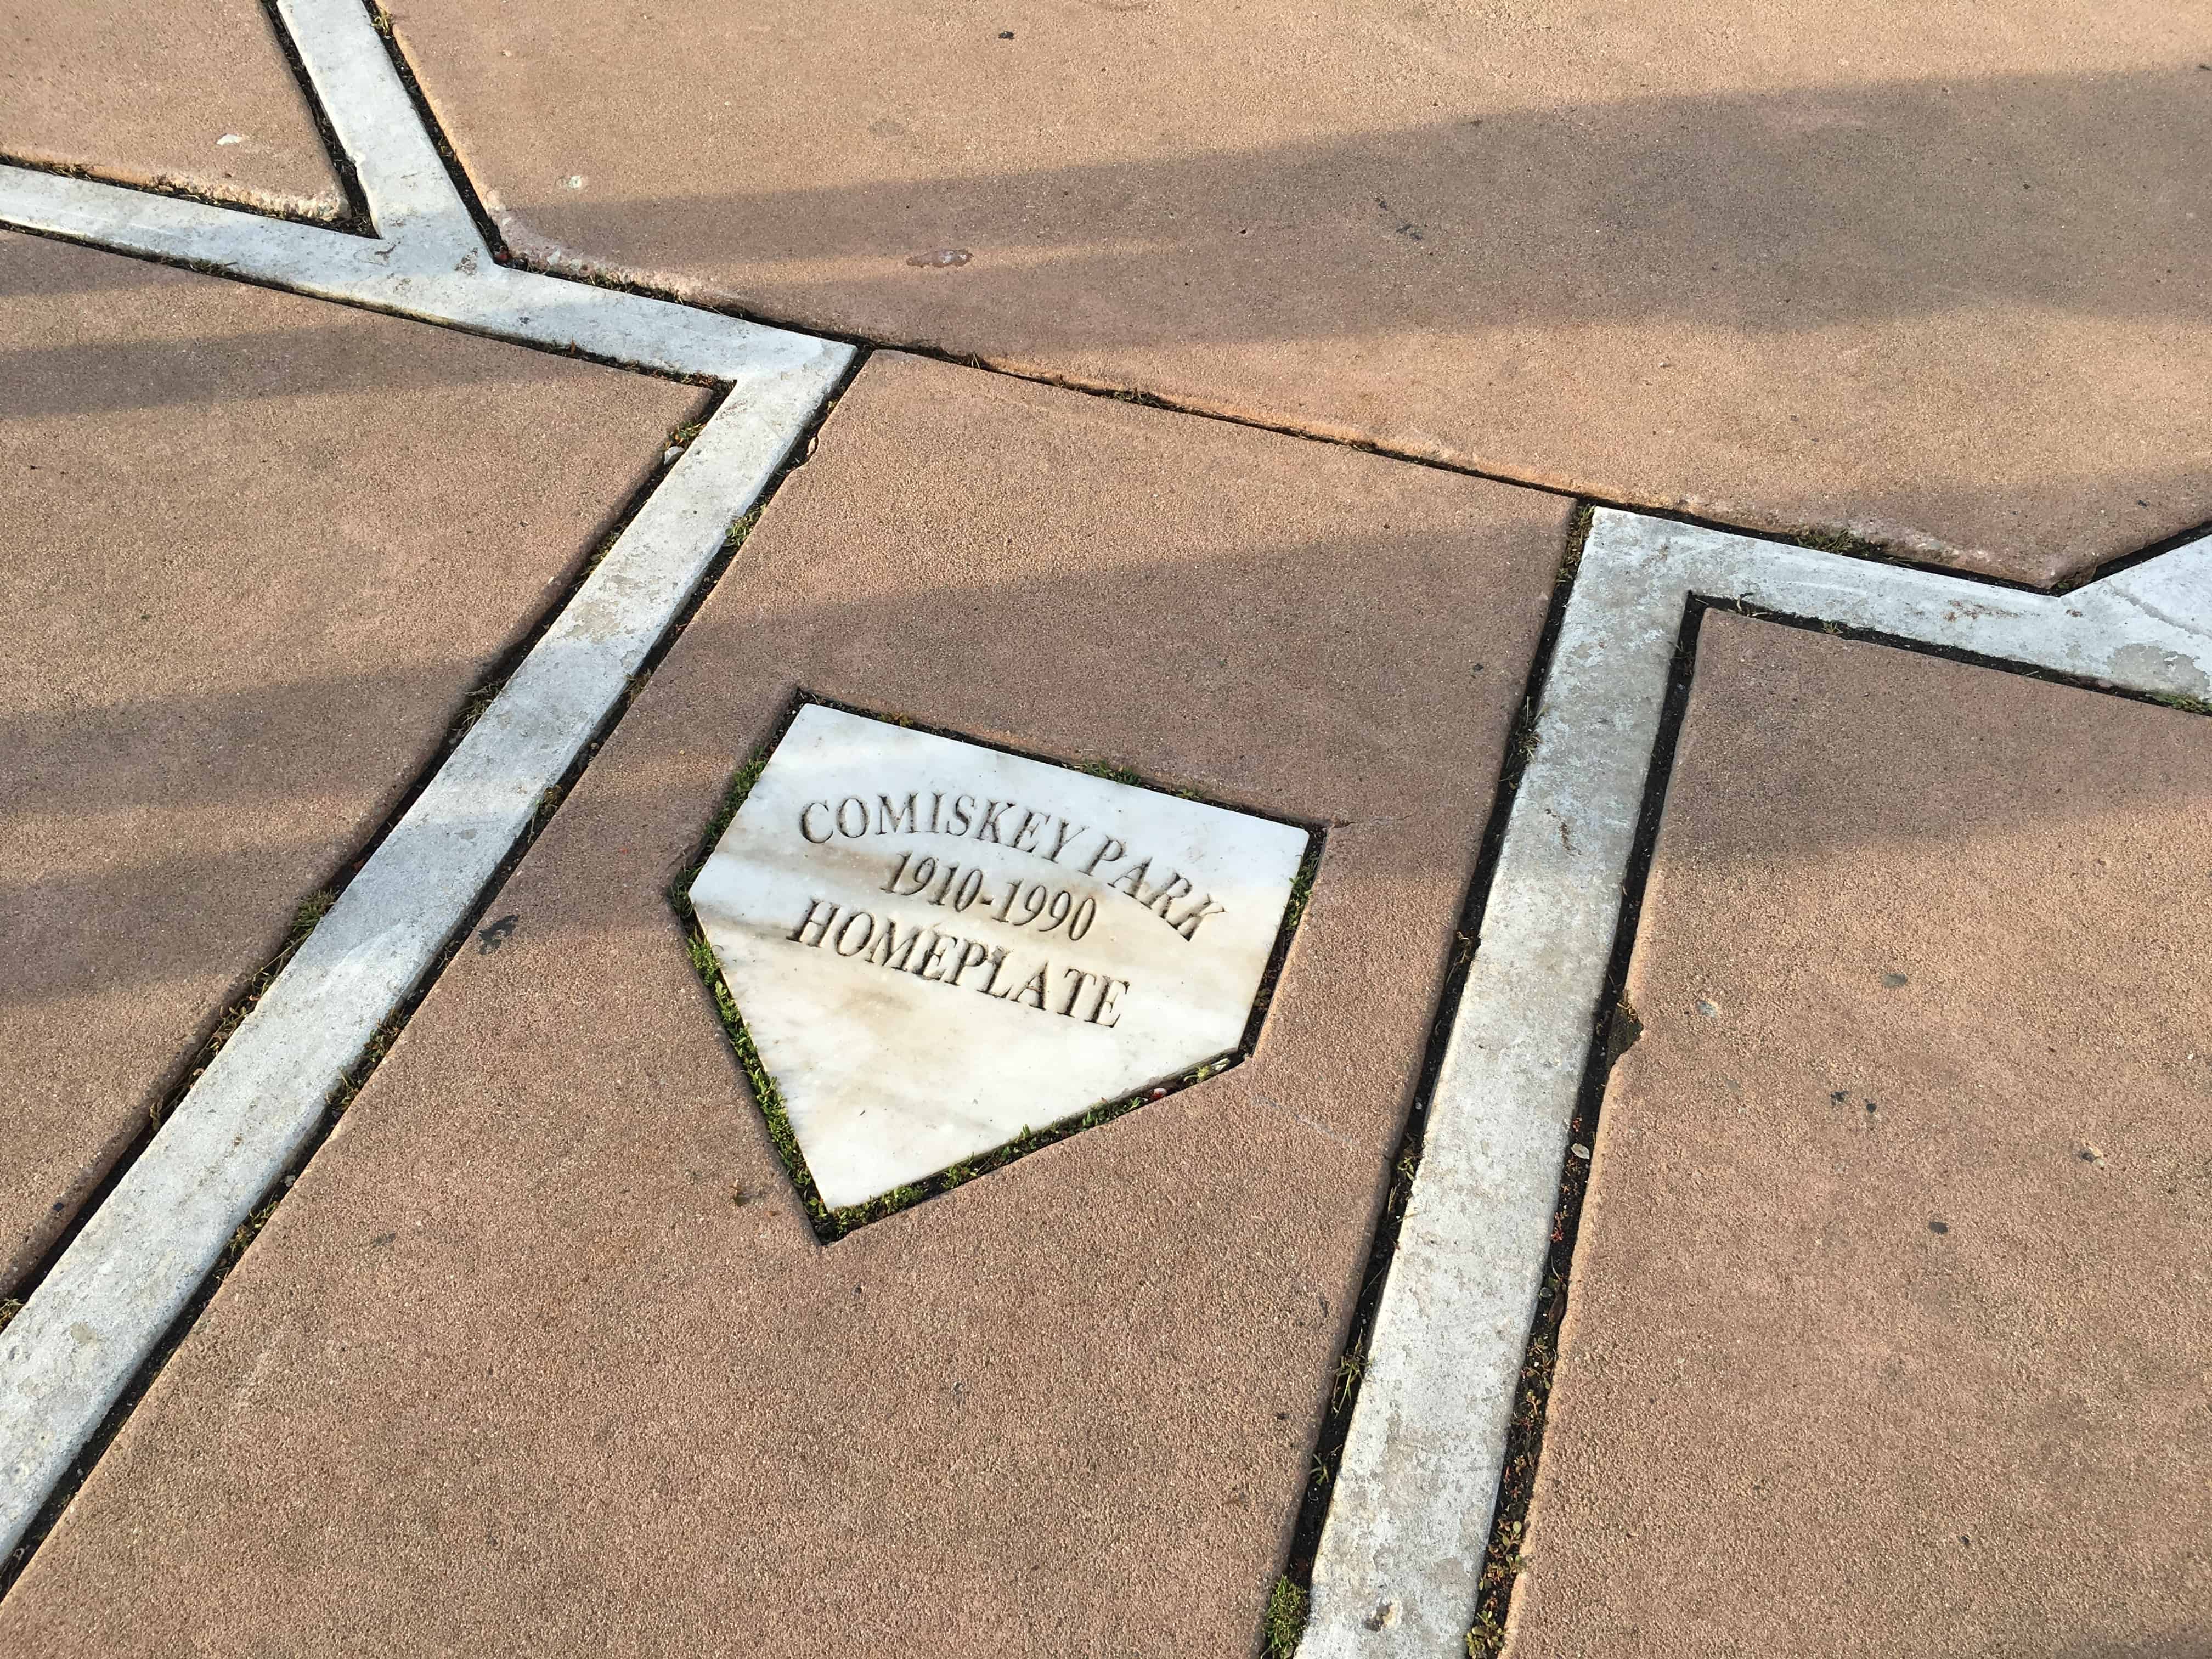 Home plate of old Comiskey Park in Chicago, Illinois